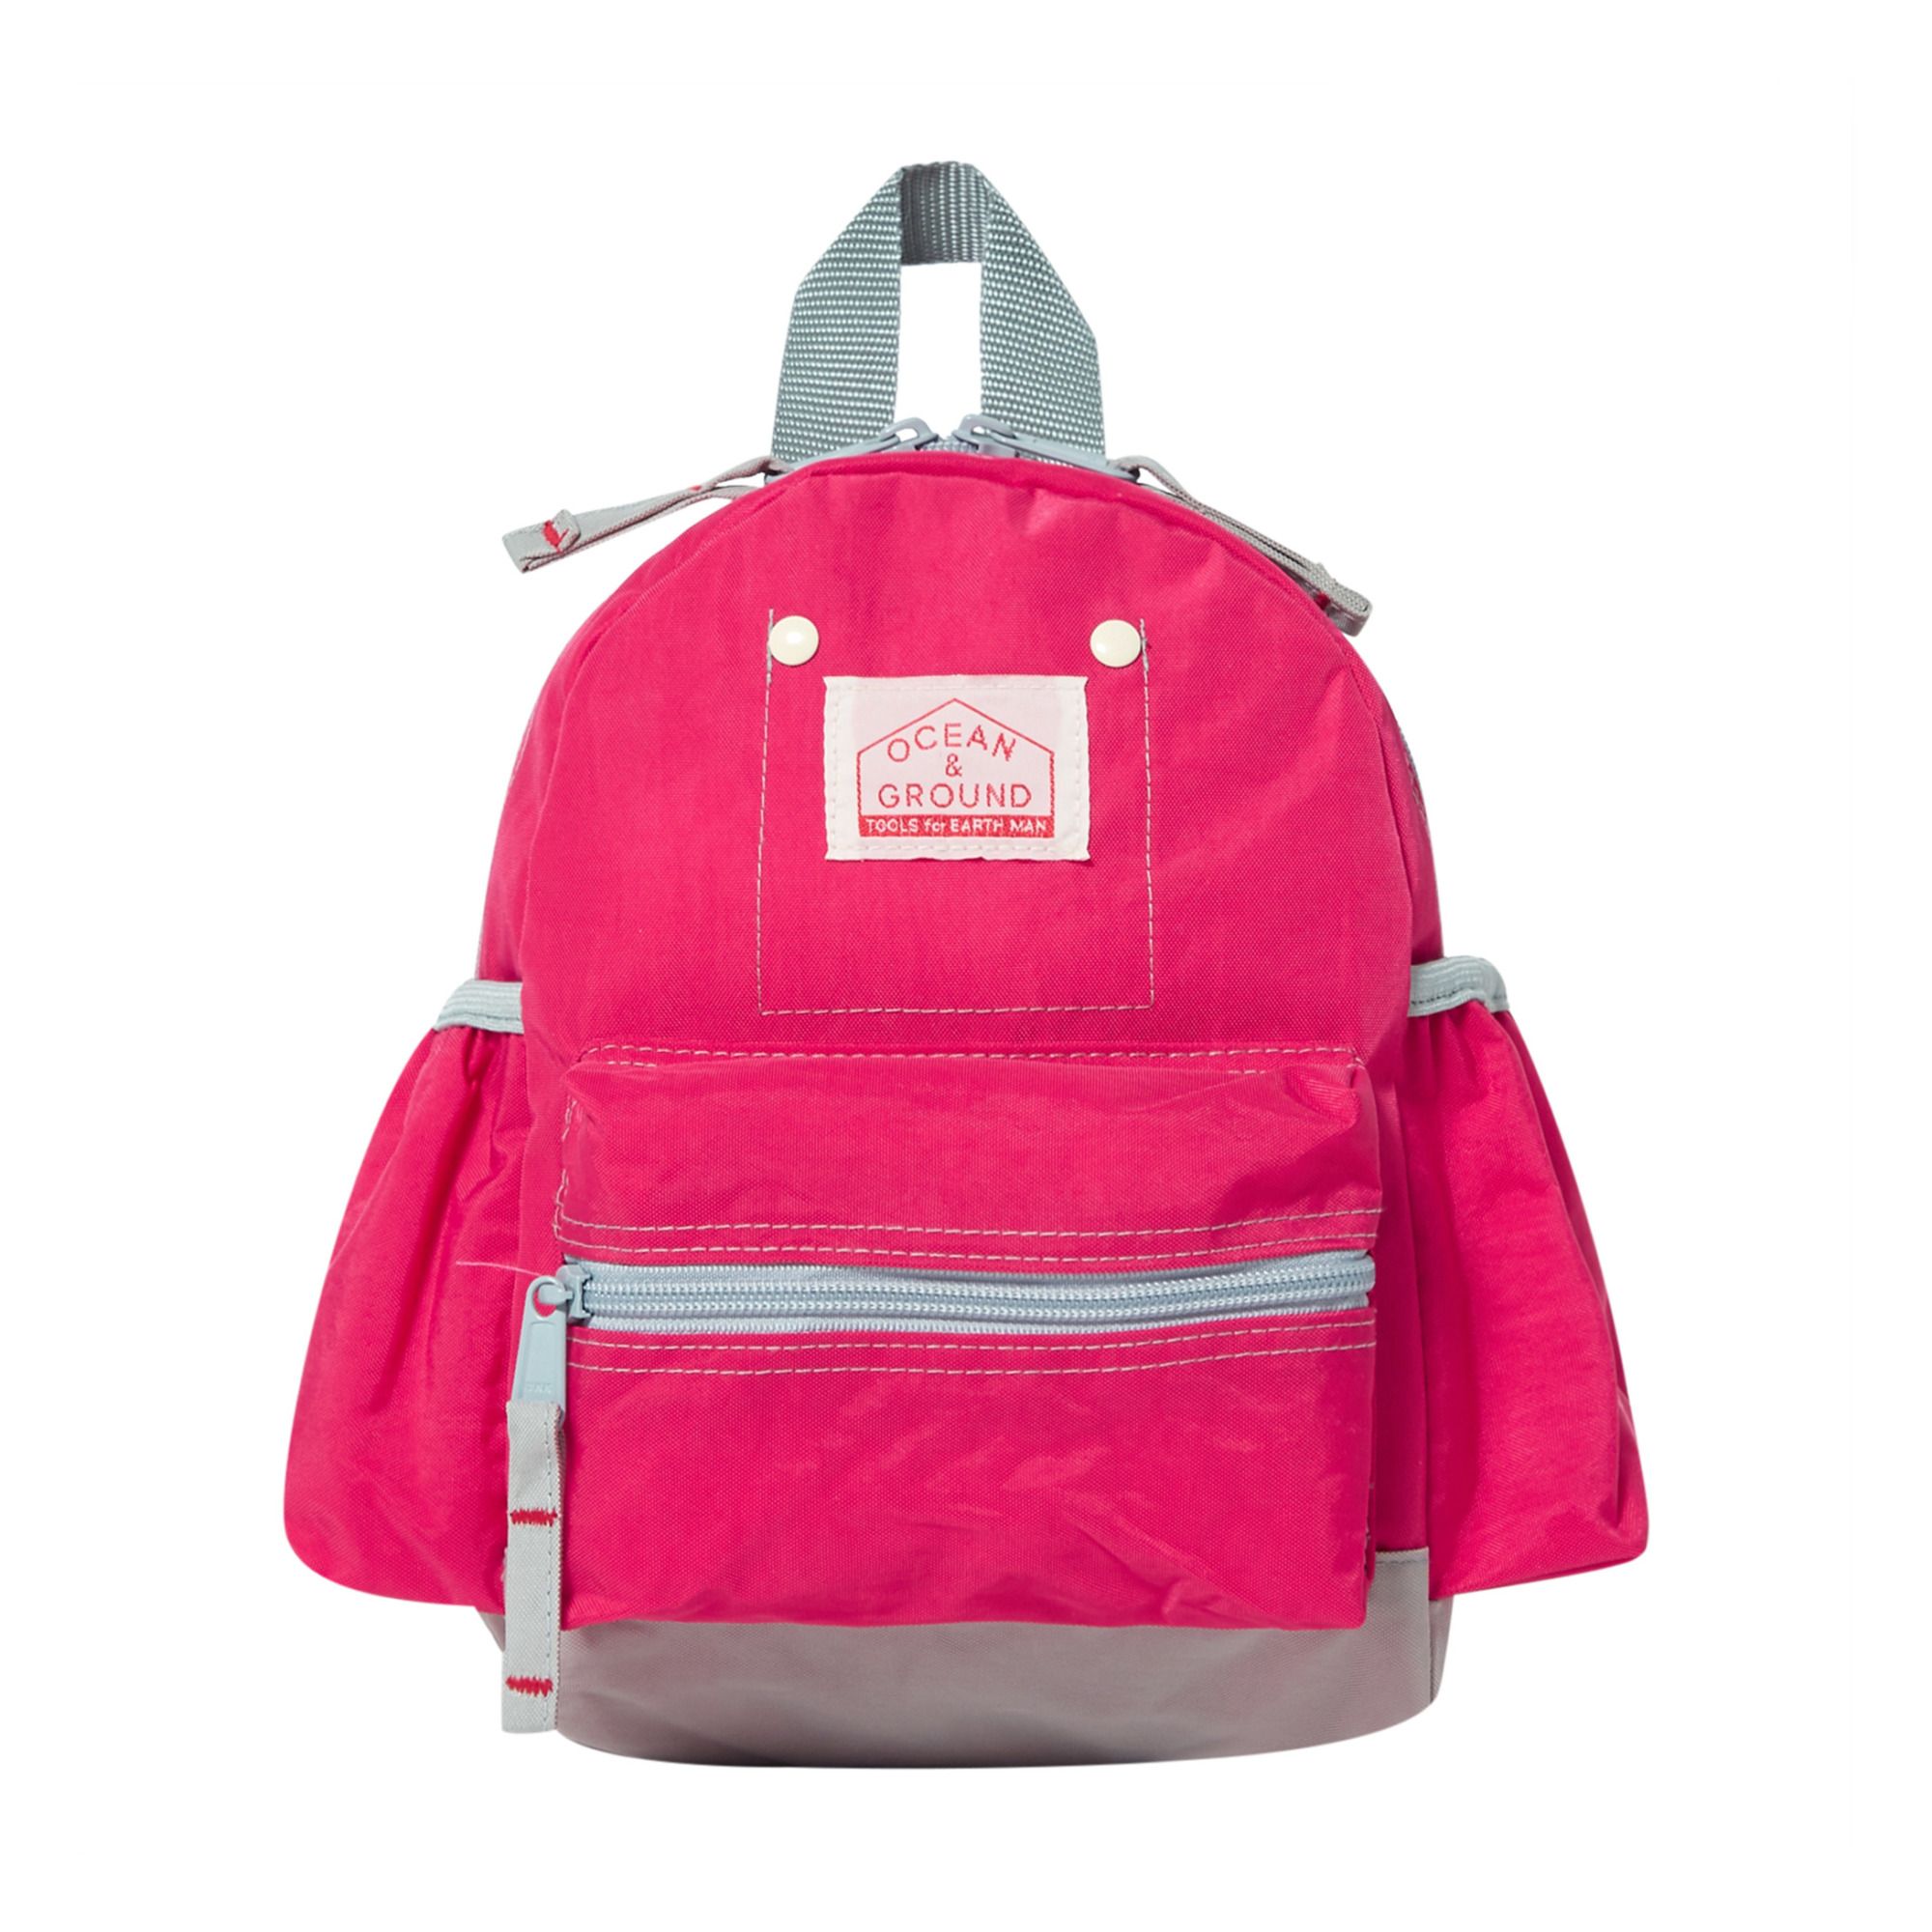 Ocean&Ground - Sac à Dos Gooday Small - Fille - Rose